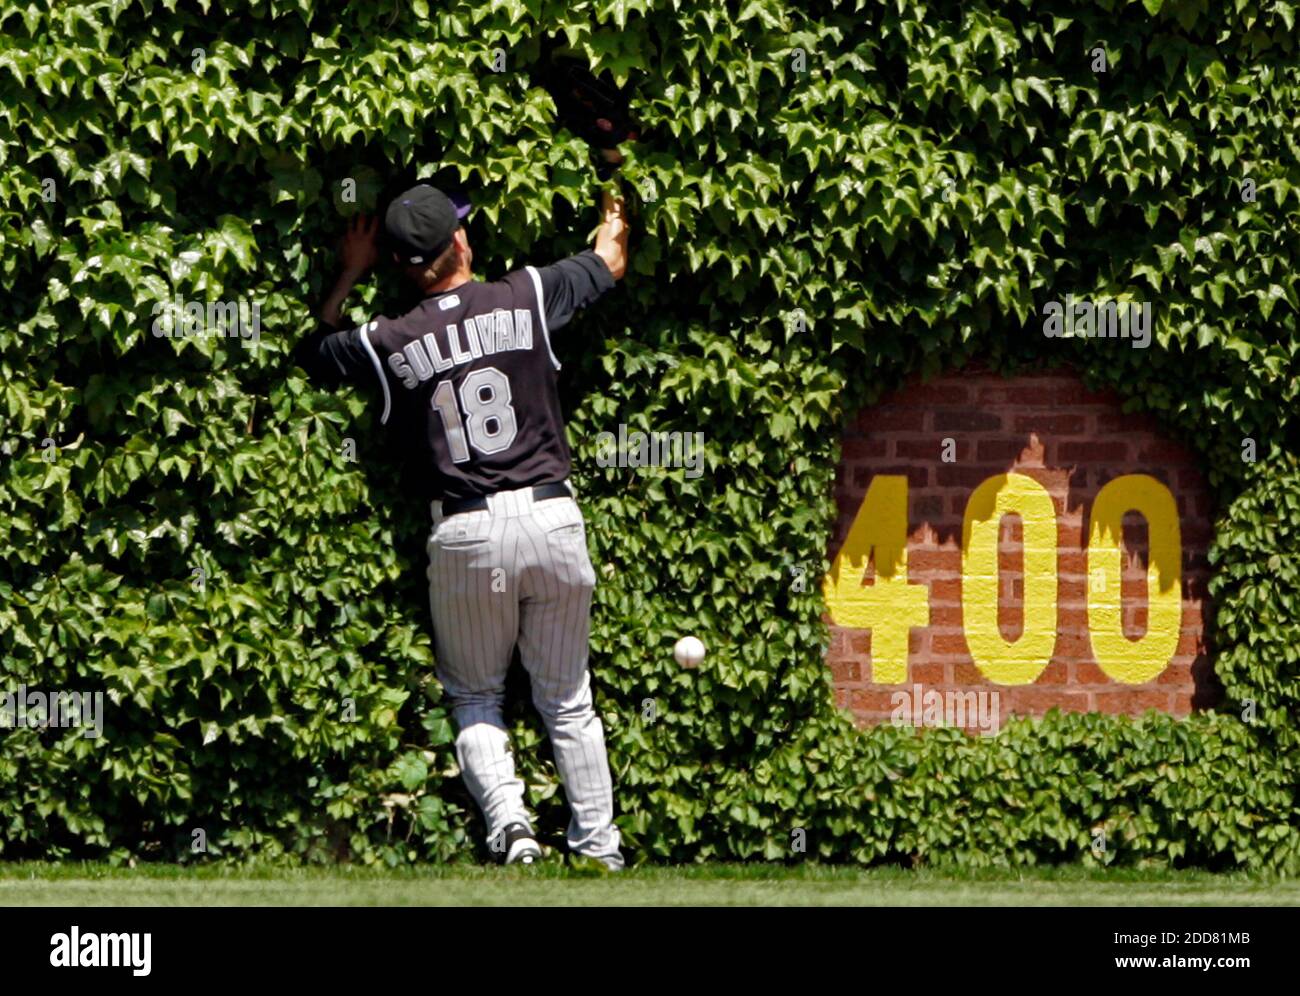 Colorado Rockies center fielder Cory Sullivan is unable to find the ball on a triple by the Chicago Cubs' Jim Edmonds in the second inning. The Cubs defeated the Rockies, 5-3, at Wrigley Field in Chicago, Il, USA on June 1, 2008. Photo by Jose M. Osorio/Chicago Tribune/MCT/Cameleon/ABACAPRESS.COM Stock Photo